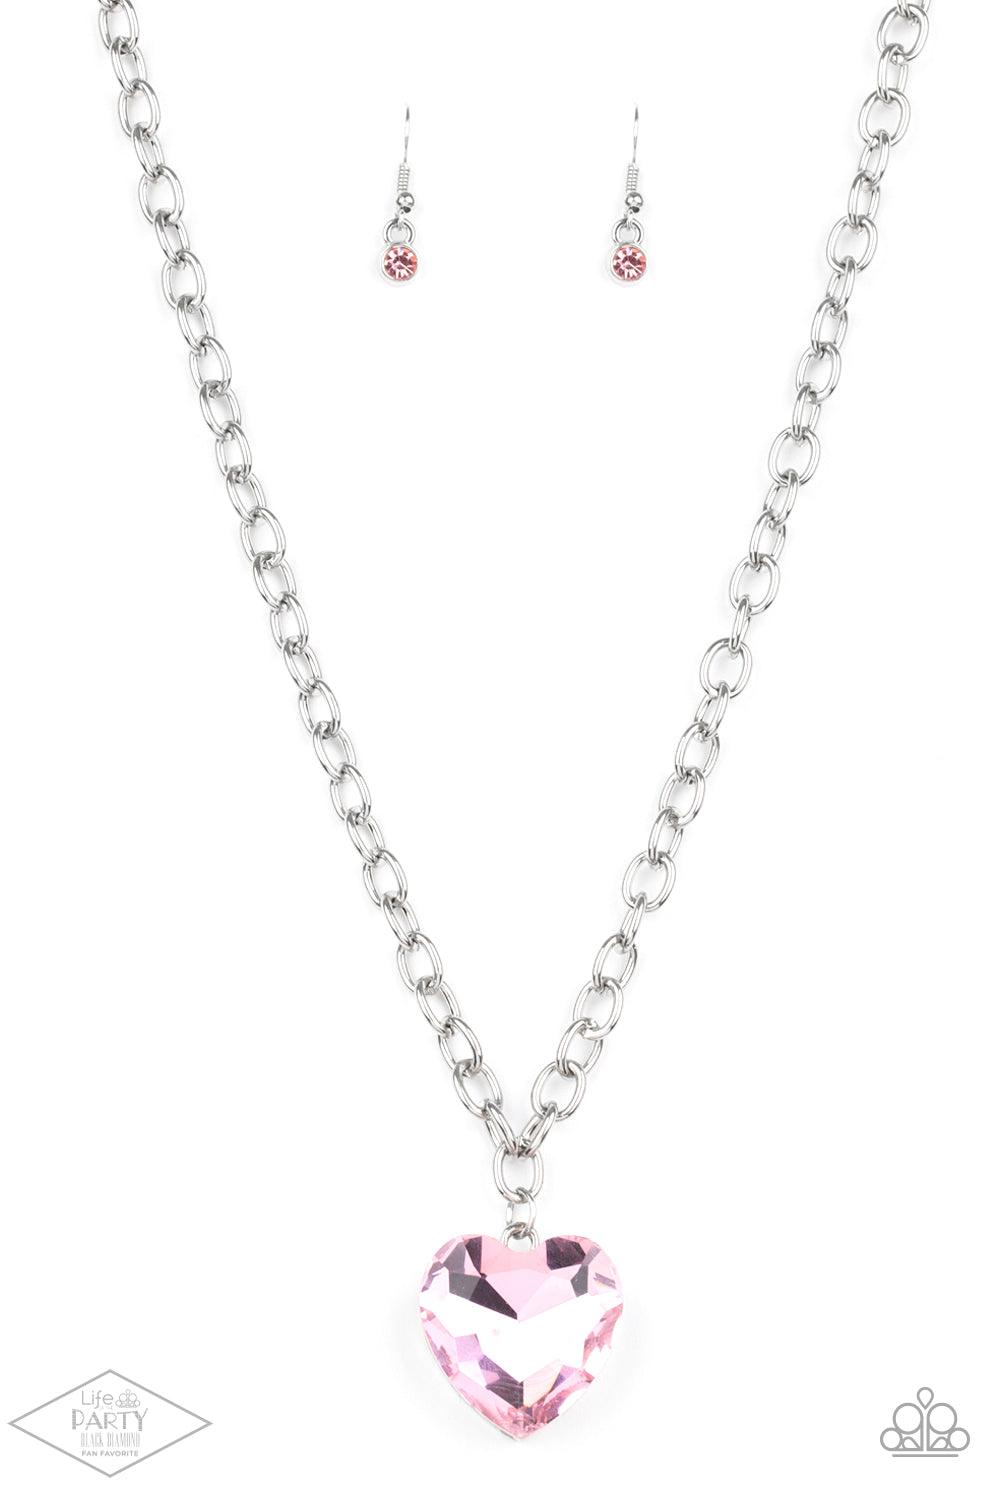 Paparazzi Accessories Flirtatiously Flashy - Pink Set atop a sleek silver fitting, a glittery pink heart-shaped gem swings from the bottom of a classic silver chain below the collar for a whimsical look. Features an adjustable clasp closure. Sold as one i